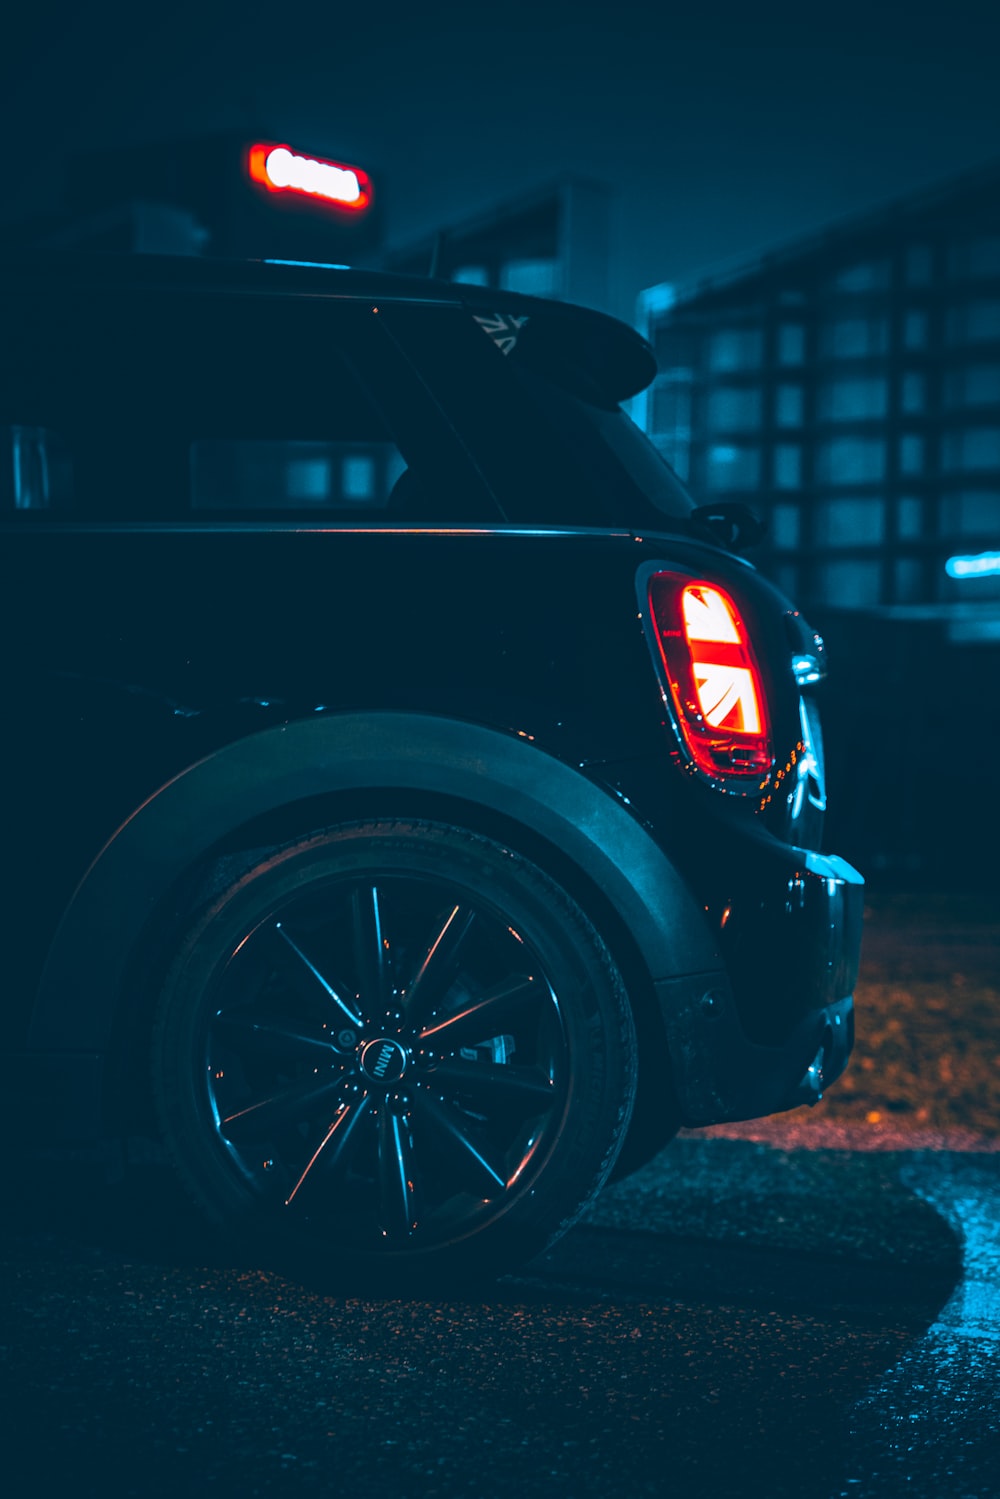 350 Mini Cooper Pictures Hd Download Free Images Stock Photos On Unsplash